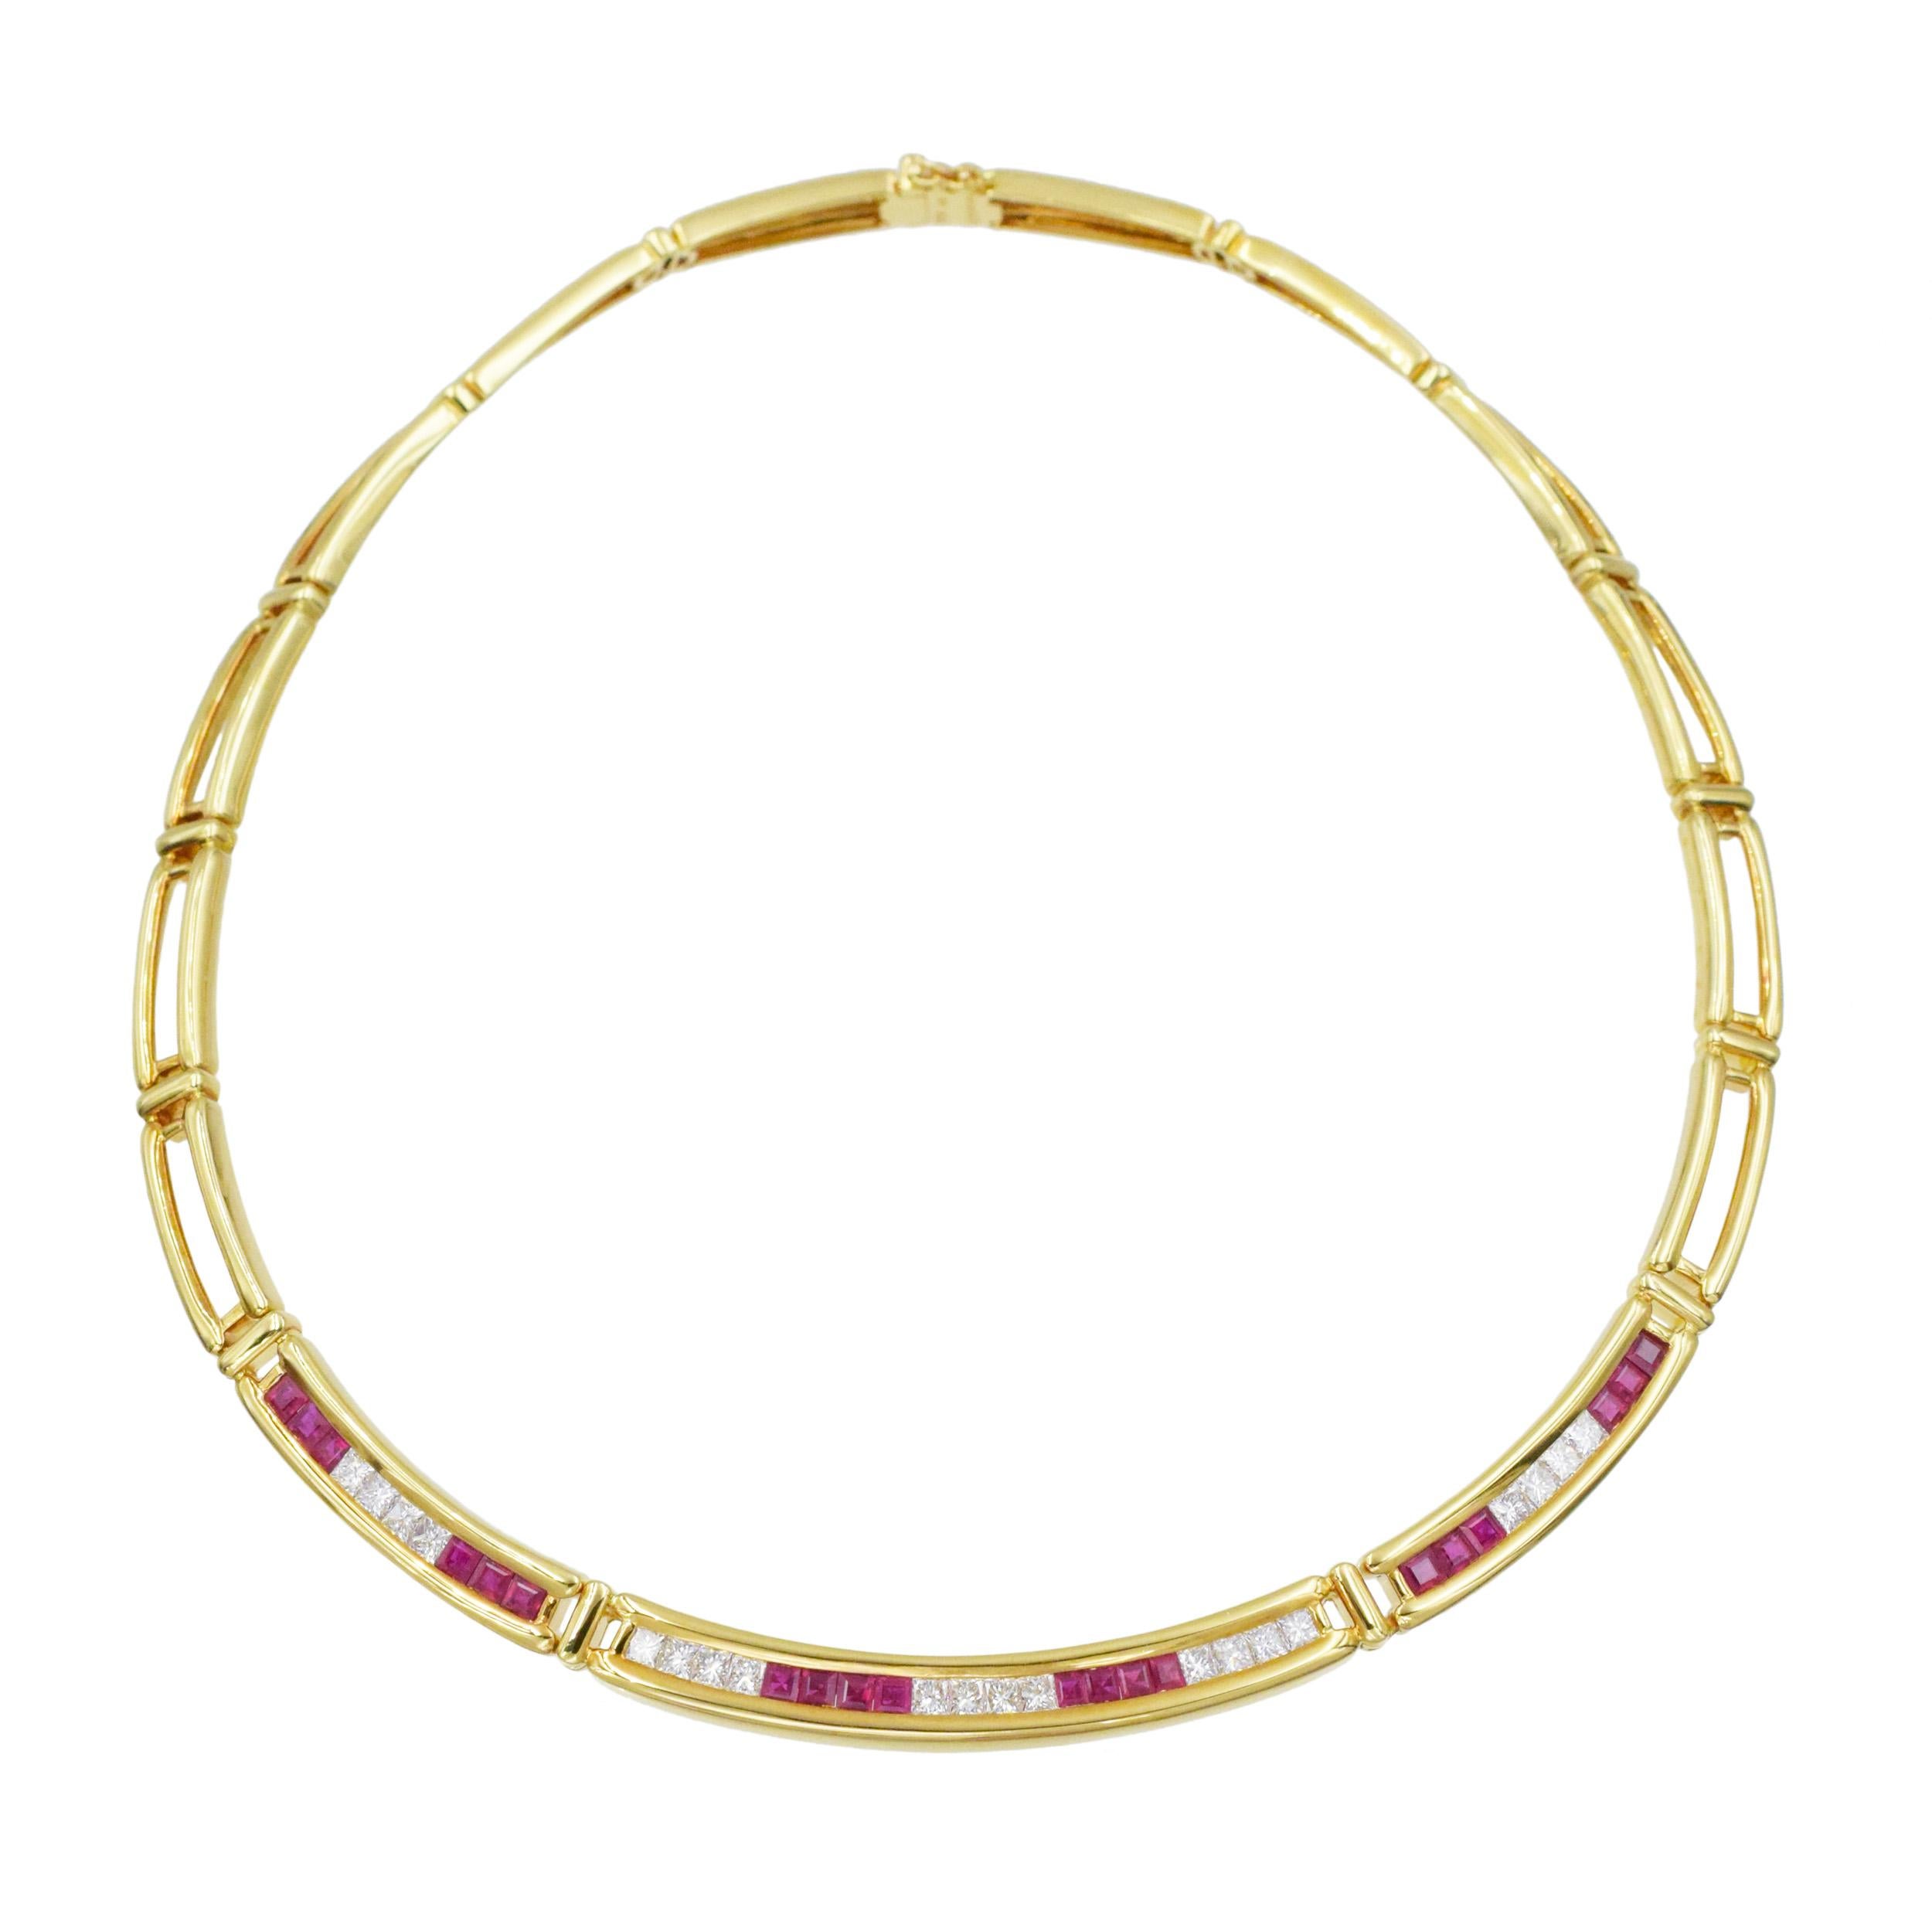 Tiffany&Co. diamond and ruby choker necklace in 18k yellow gold. The necklace consists of 12
rectangular open links and 3 diamond and ruby set links. There is 20 square cut rubies with total weight of approximately 3.00ct, and 20 princess cut